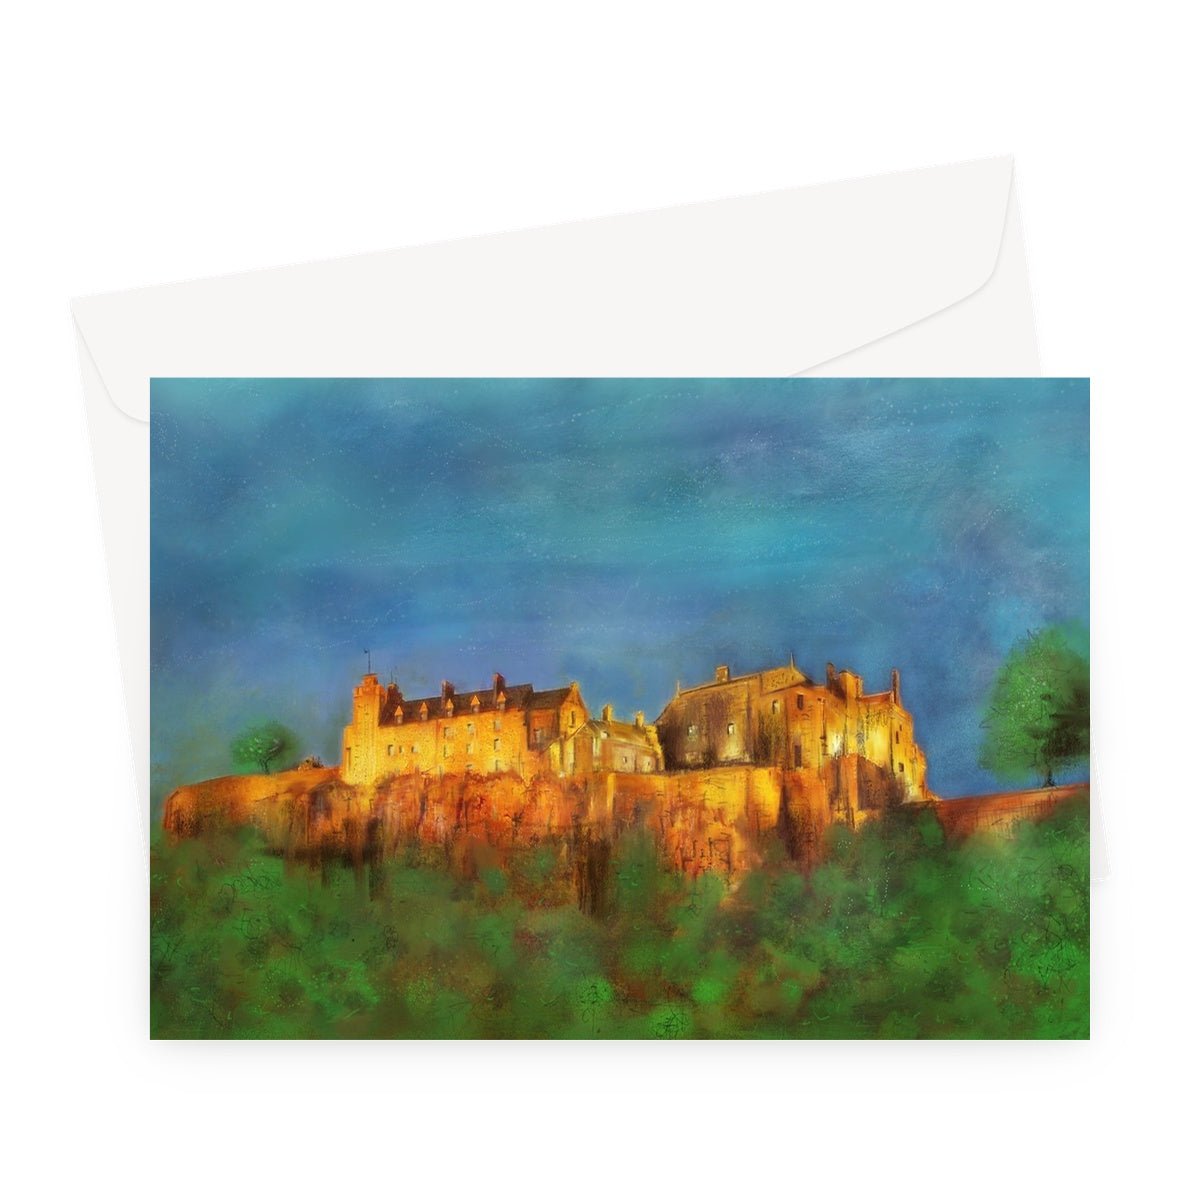 Stirling Castle Art Gifts Greeting Card-Greetings Cards-Scottish Castles Art Gallery-A5 Landscape-1 Card-Paintings, Prints, Homeware, Art Gifts From Scotland By Scottish Artist Kevin Hunter